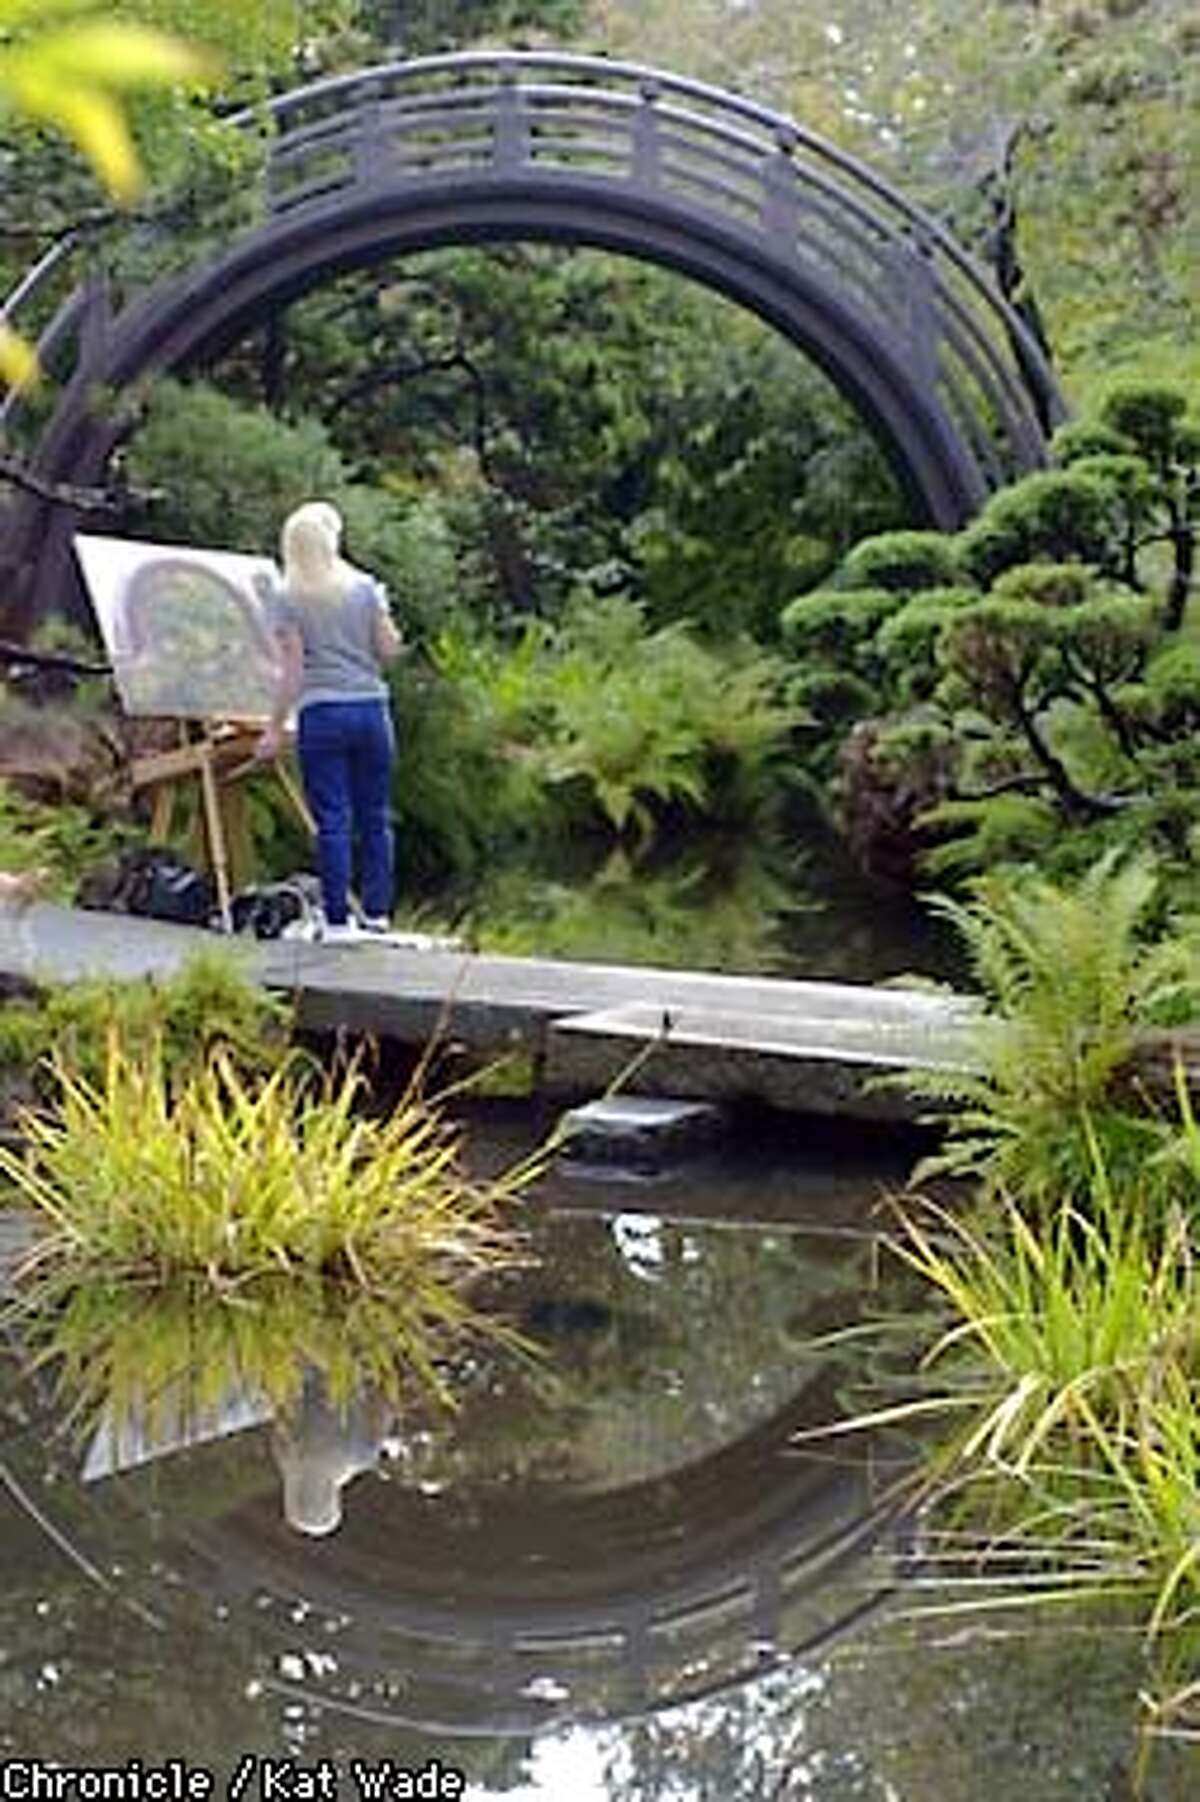 Artist Bonnie Christy, paints her rendition of the Drum Bridge that leads from the main pond towards the tea house at the Japanese Tea Garden in Golden Gate Park, San Francisco. SAN FRANCISCO CHRONICLE PHOTO BY KAT WADE